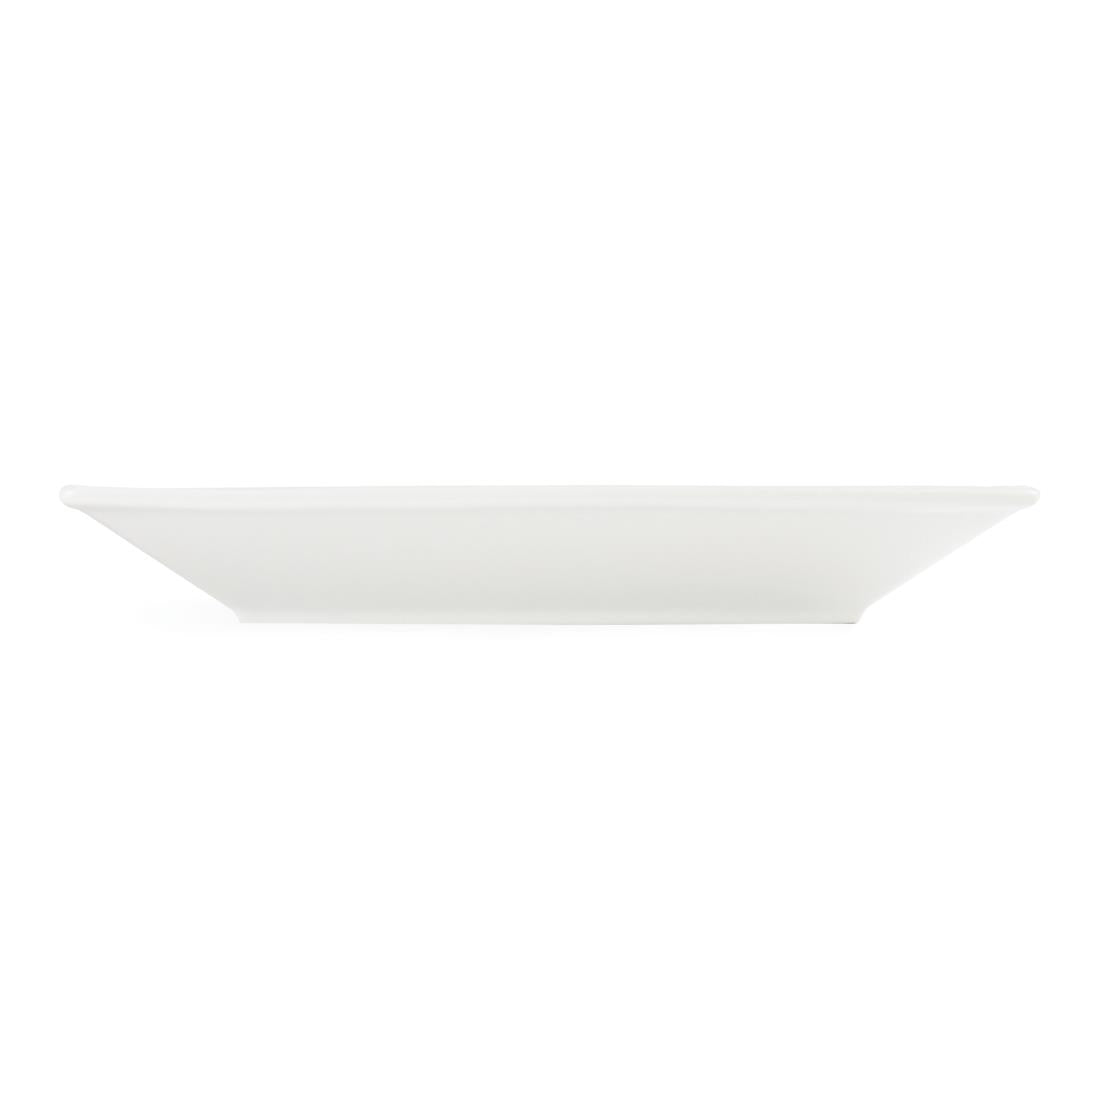 C360 Olympia Whiteware Square Plates Wide Rim 250mm (Pack of 6)